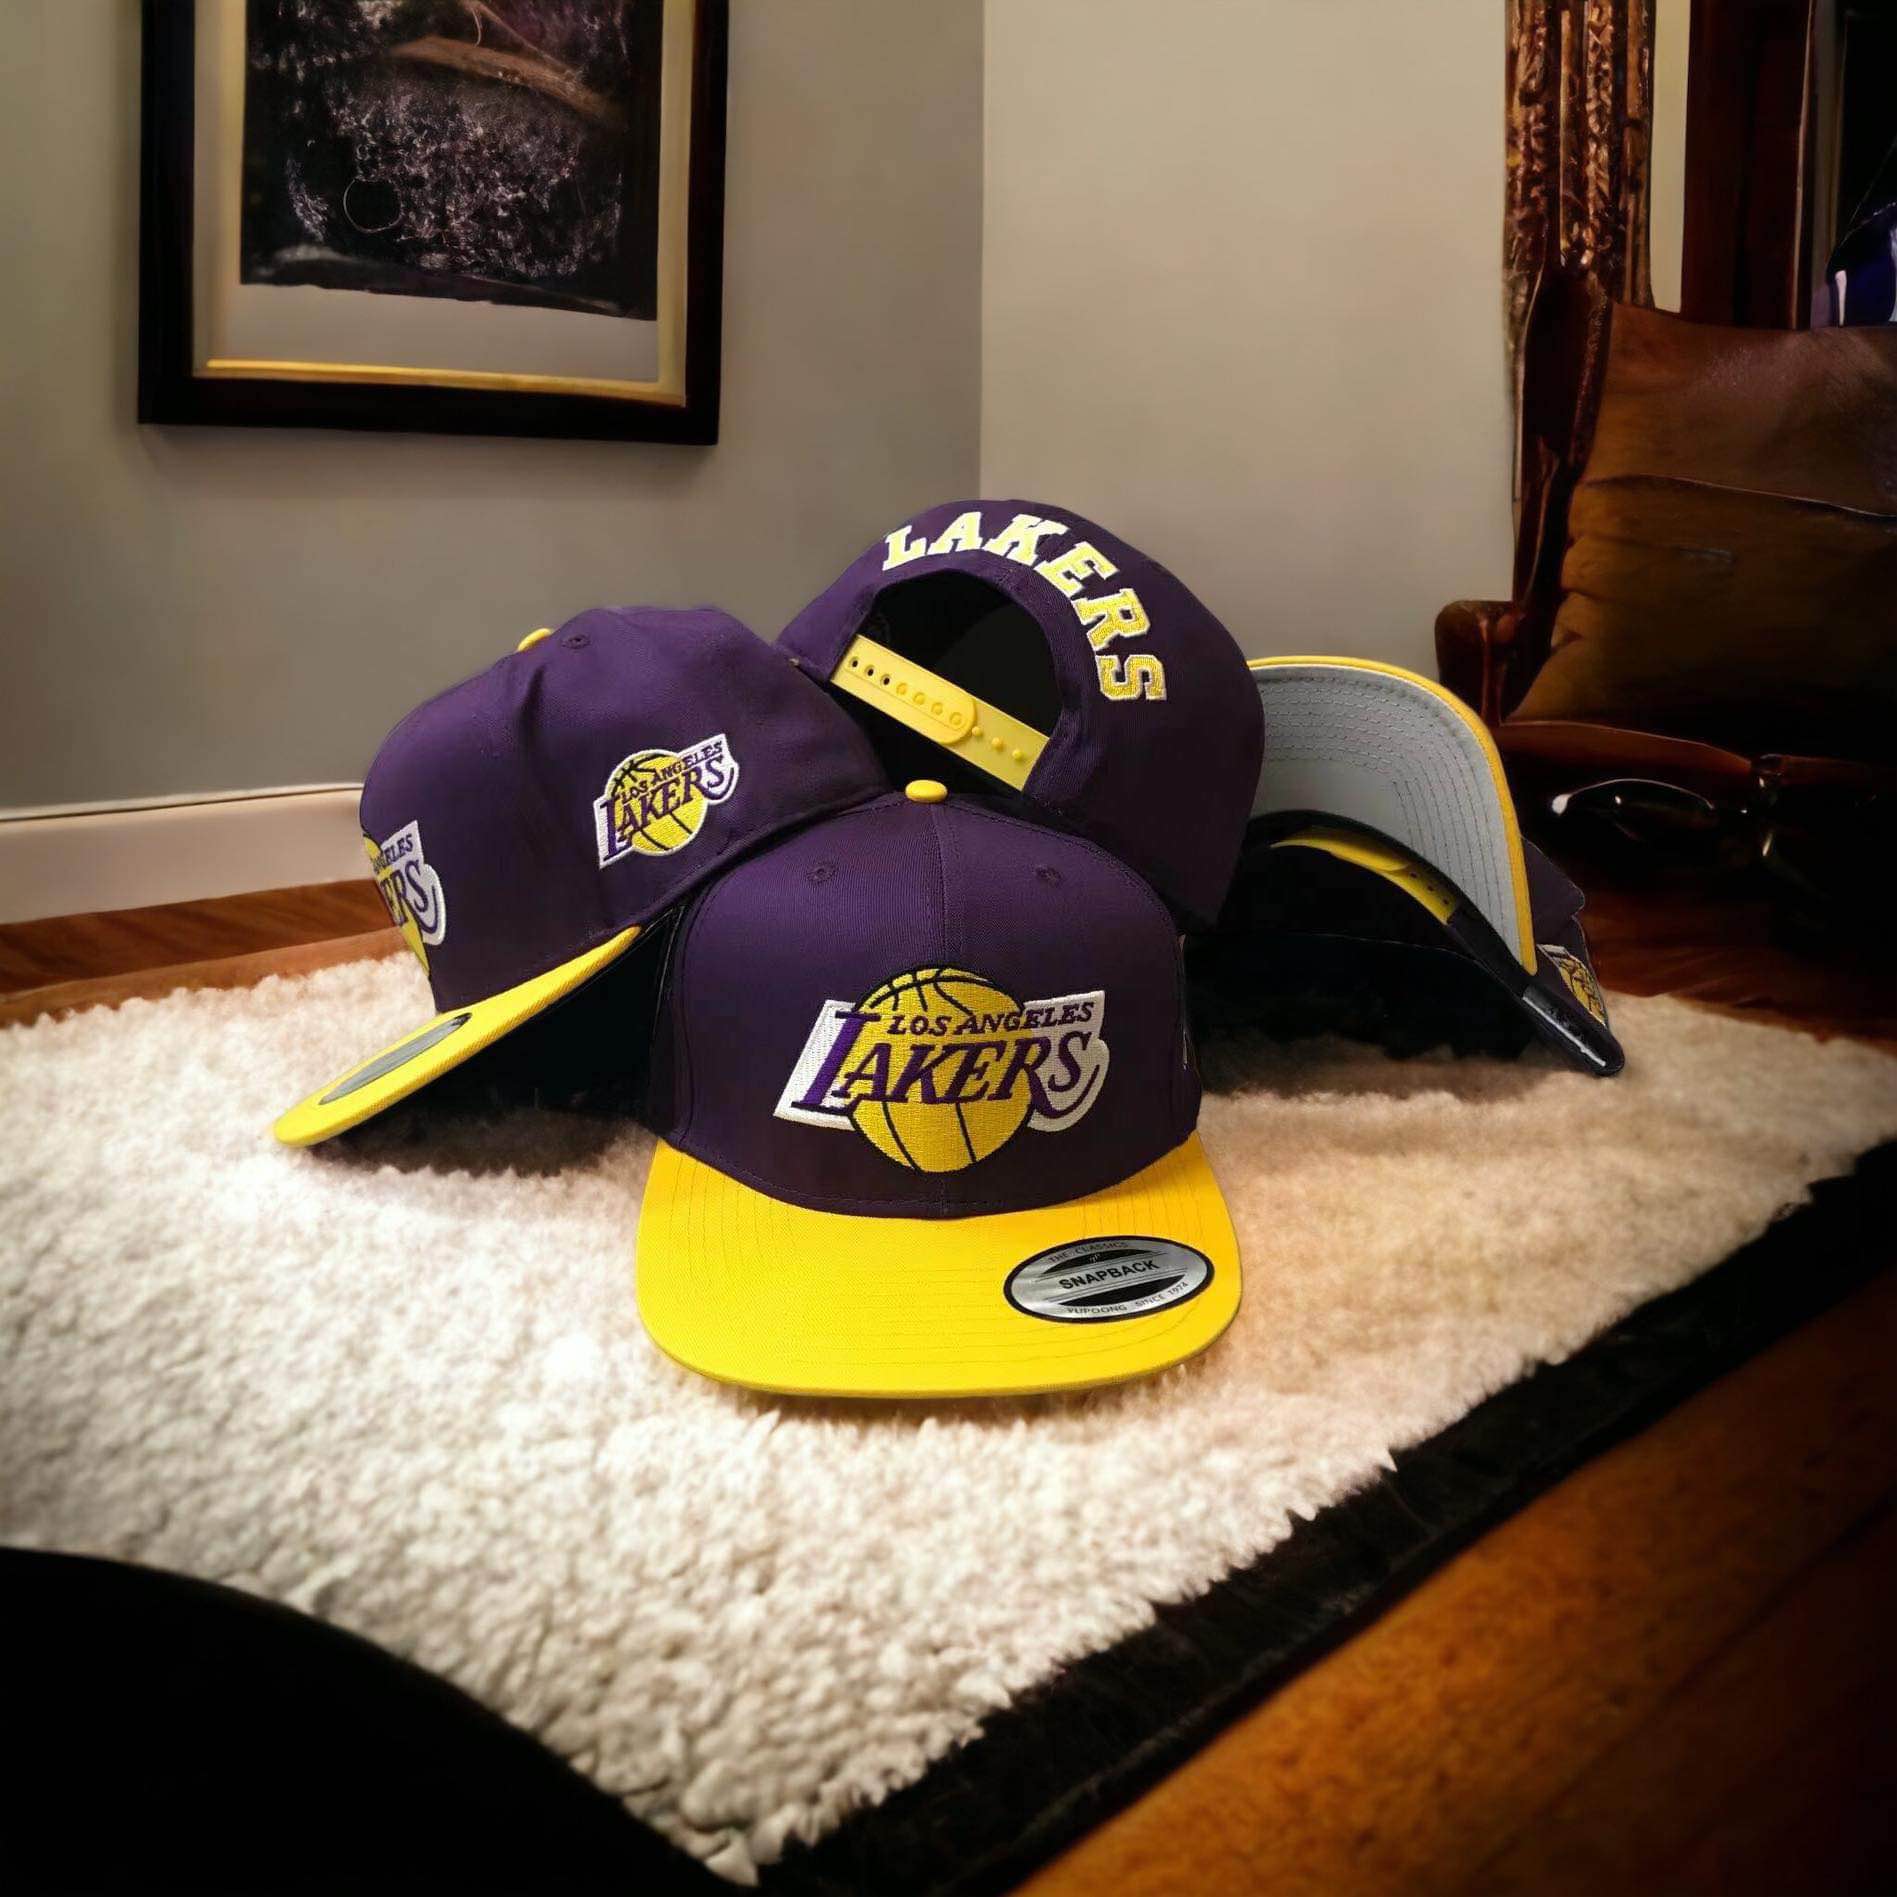 Lakers bheads 2toon snapback vintage cap high quality